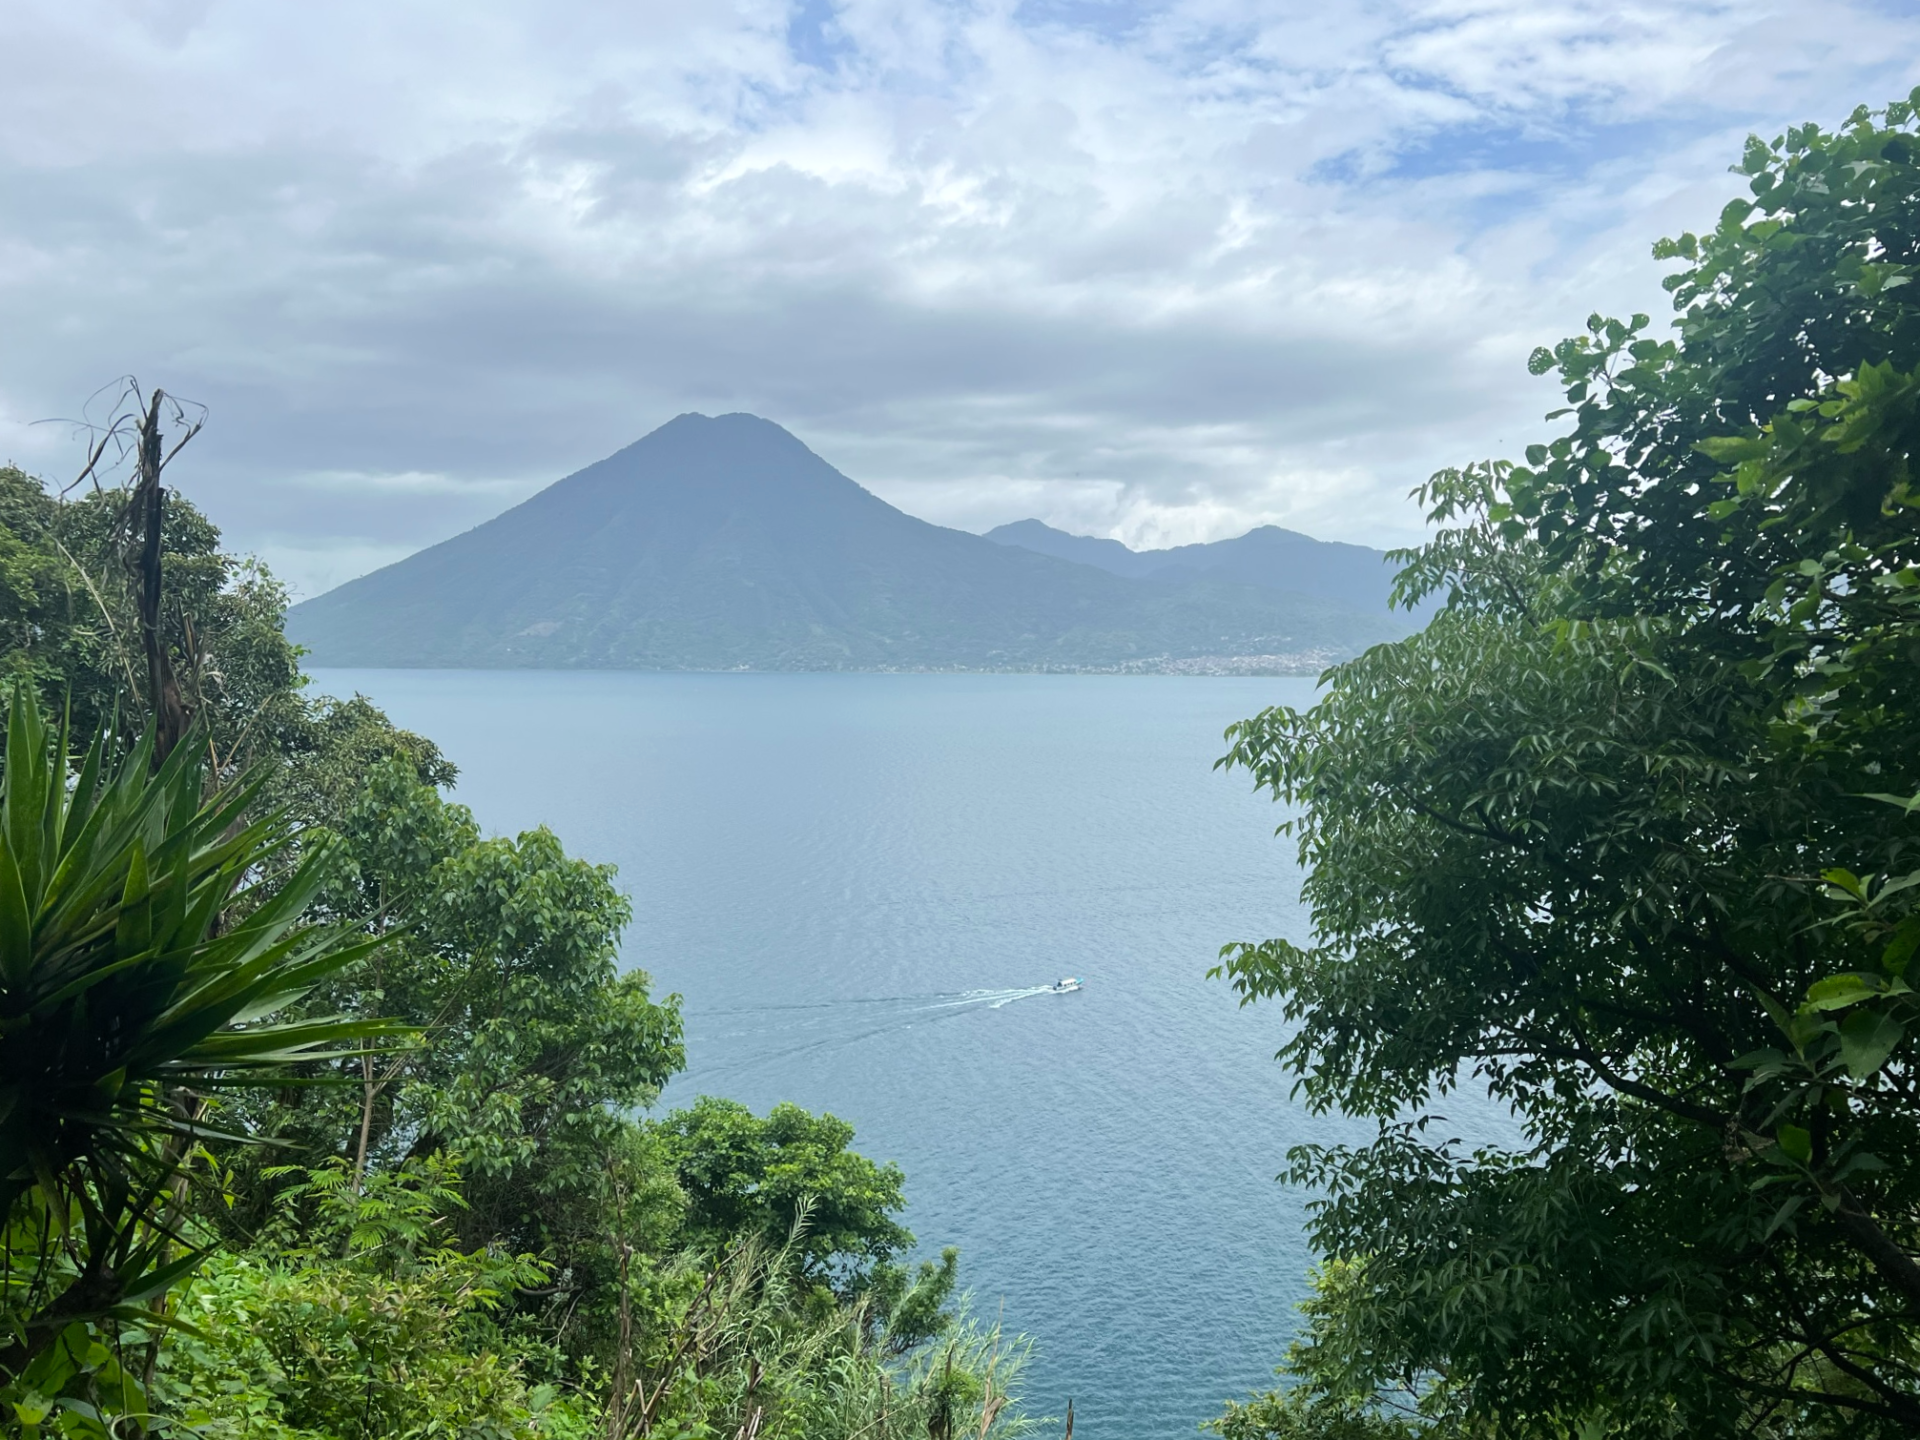 Visiting Lake Atitlan in Guatemala – and What Expats “Owe” a Community